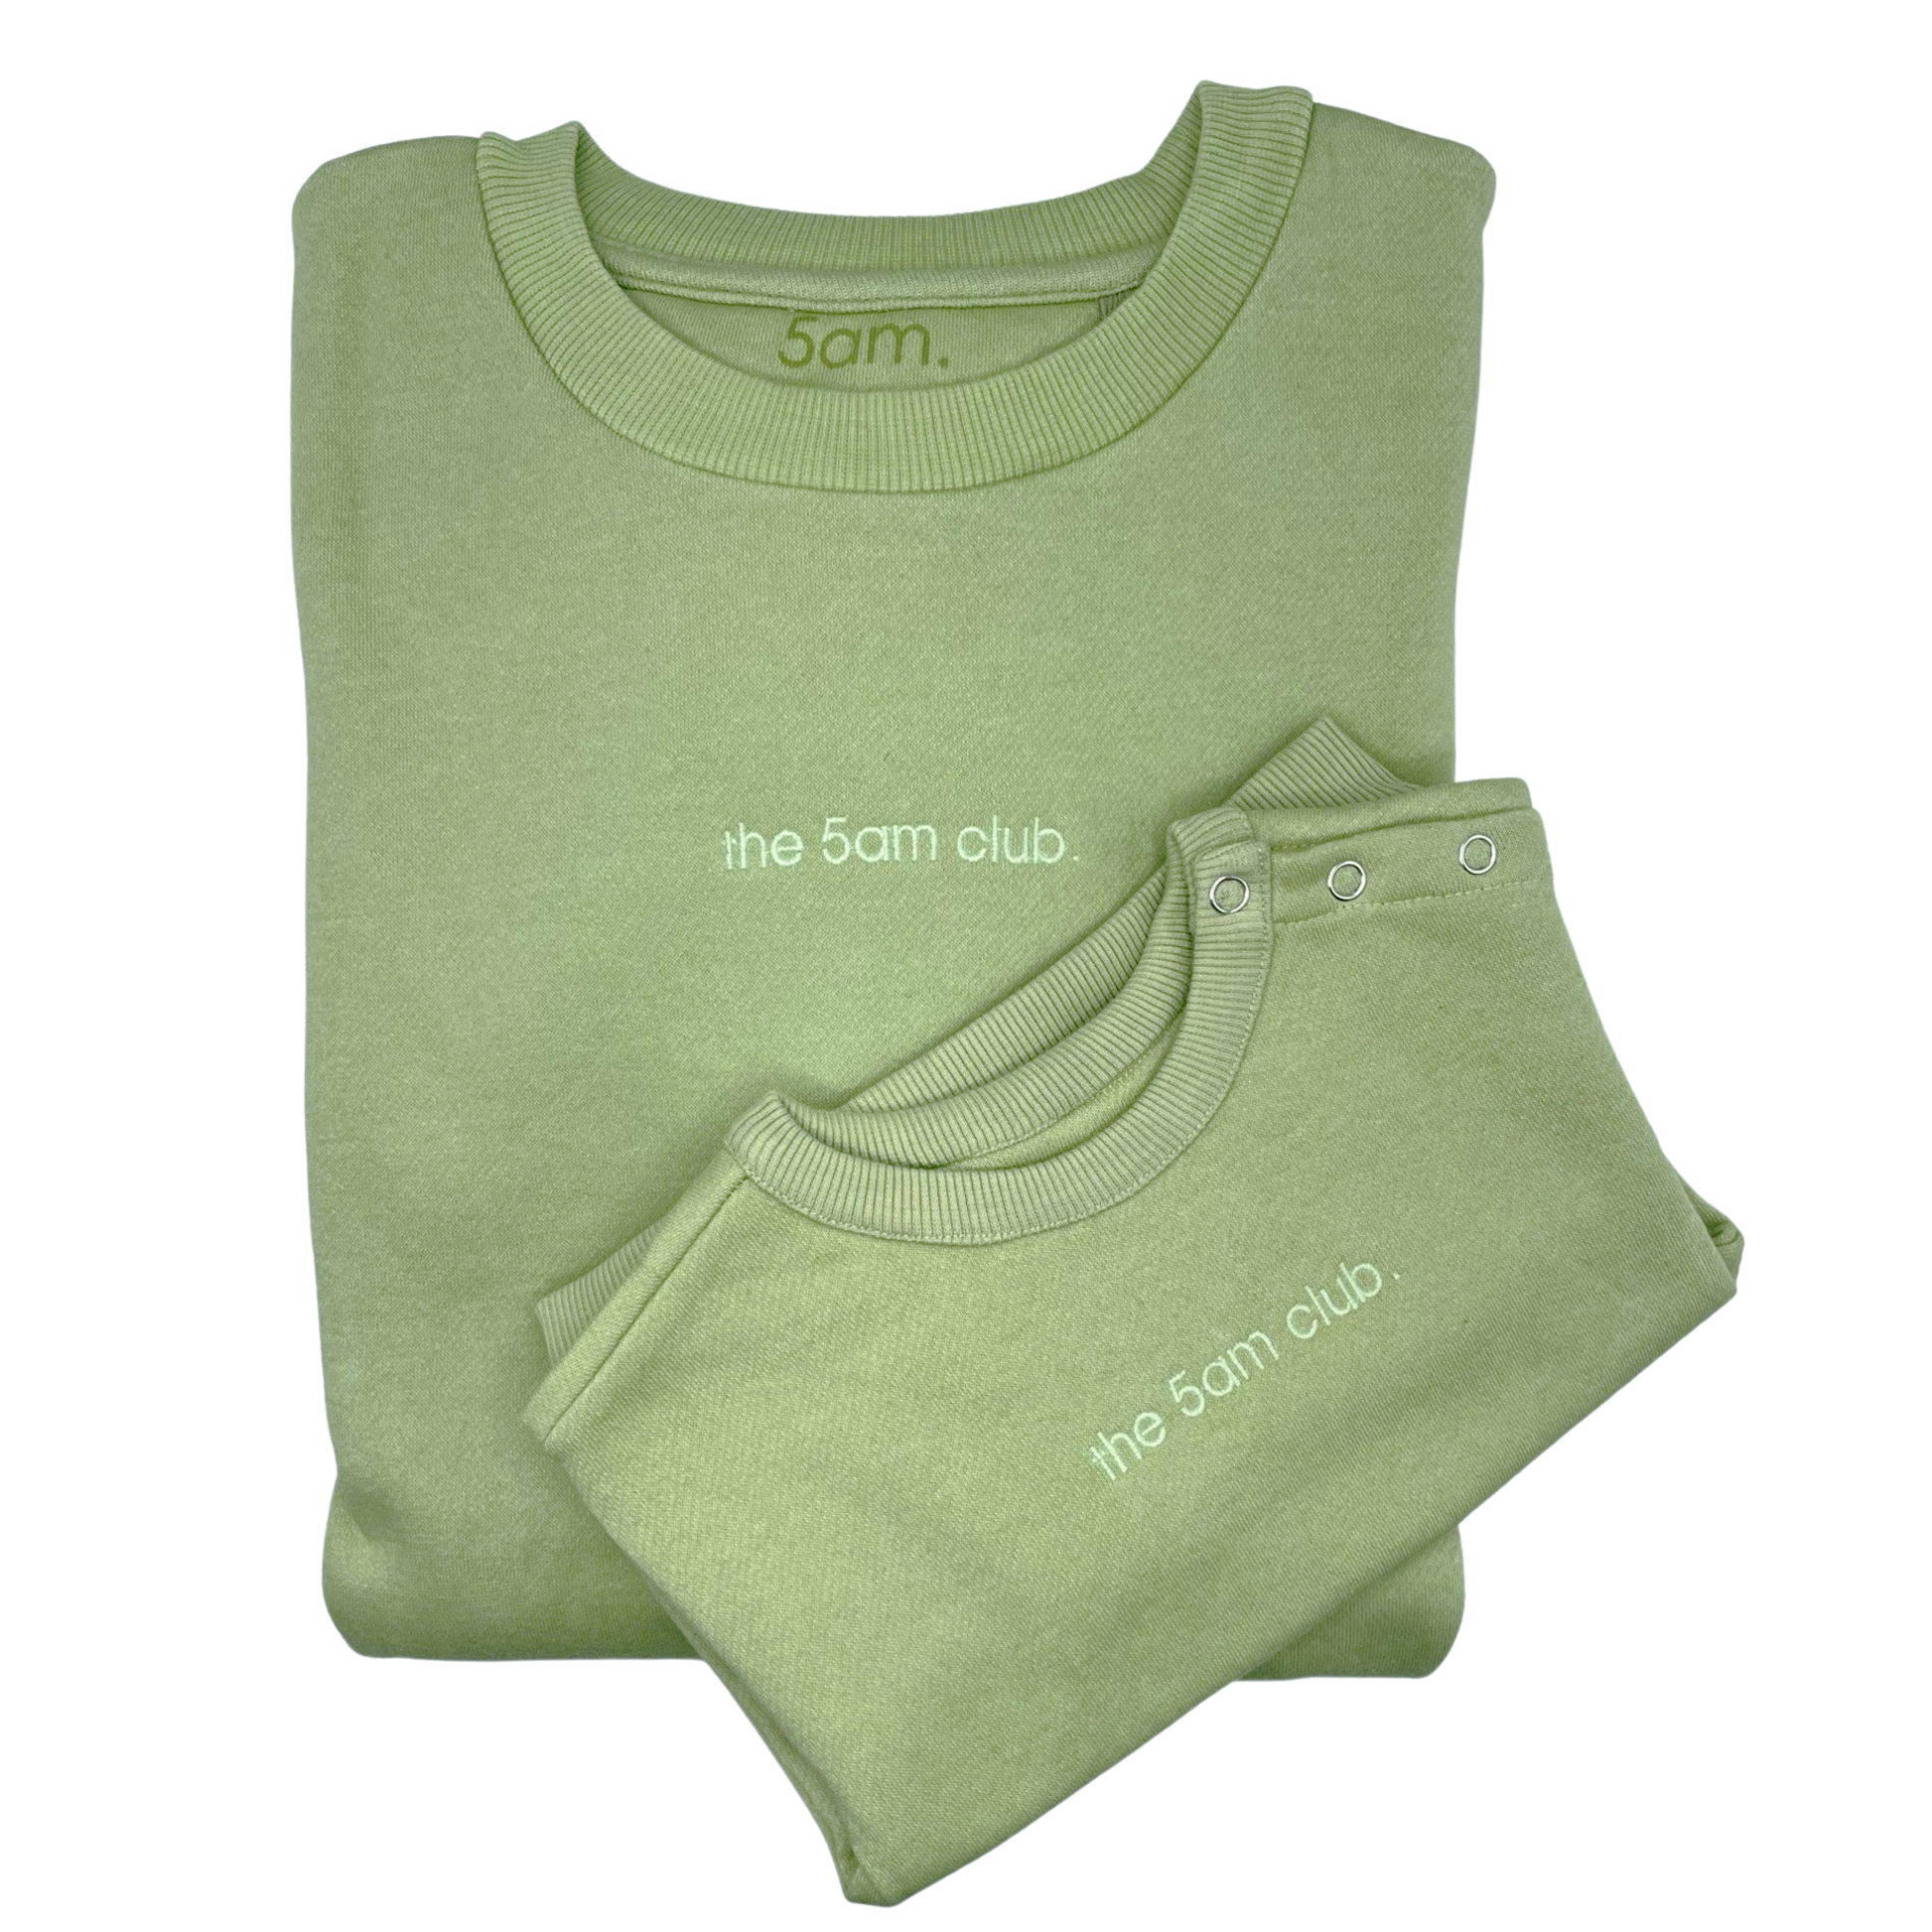 sage green womens sweatshirt with the 5am club logo on the chest